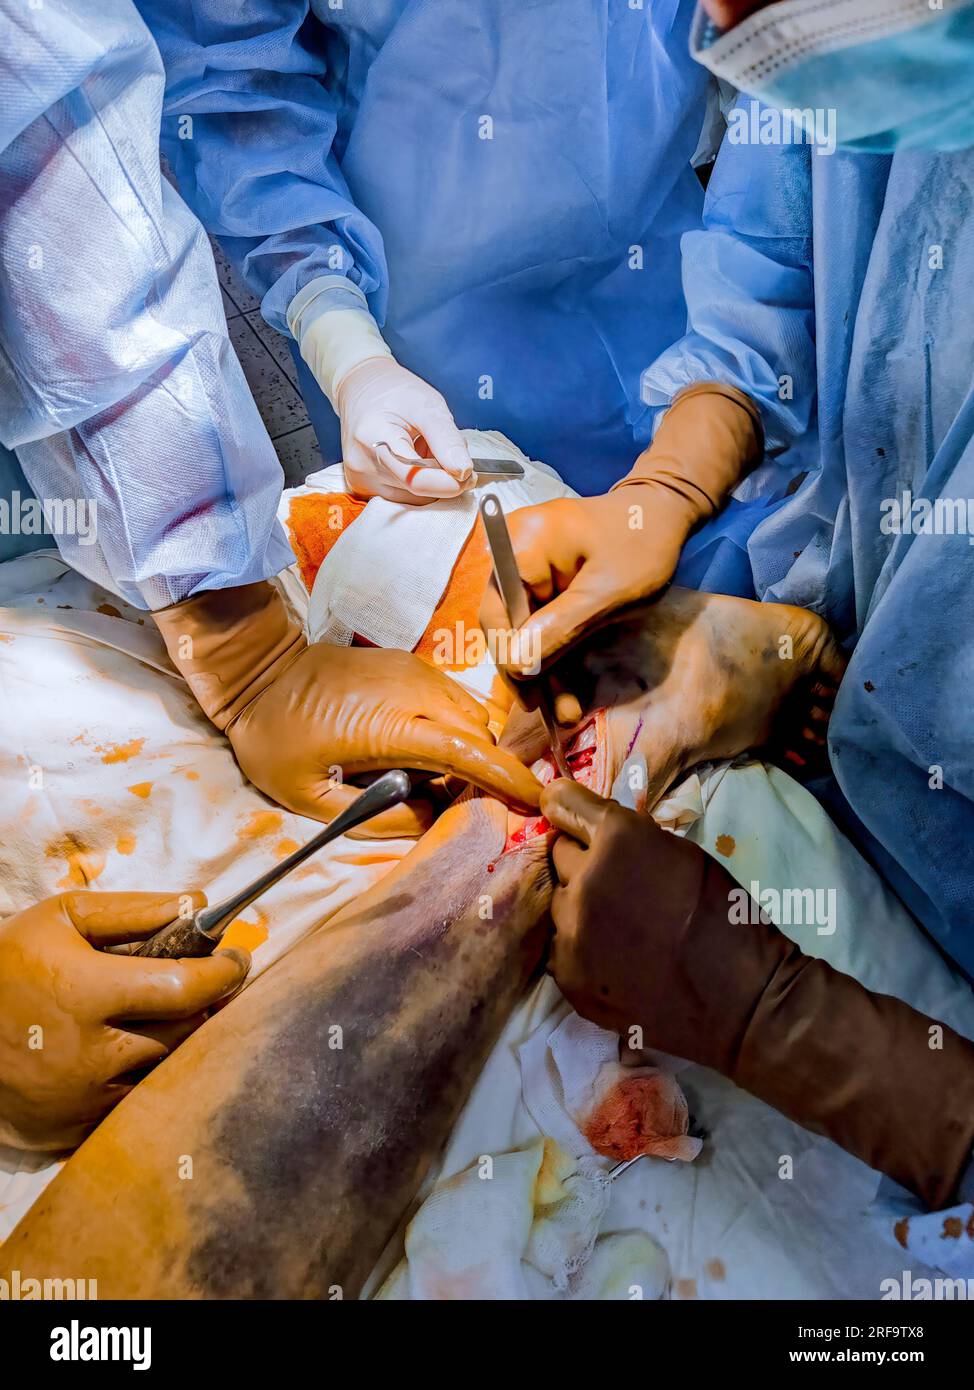 In event of leg fracture, surgeons conduct surgical procedure to install metal plate. Stock Photo